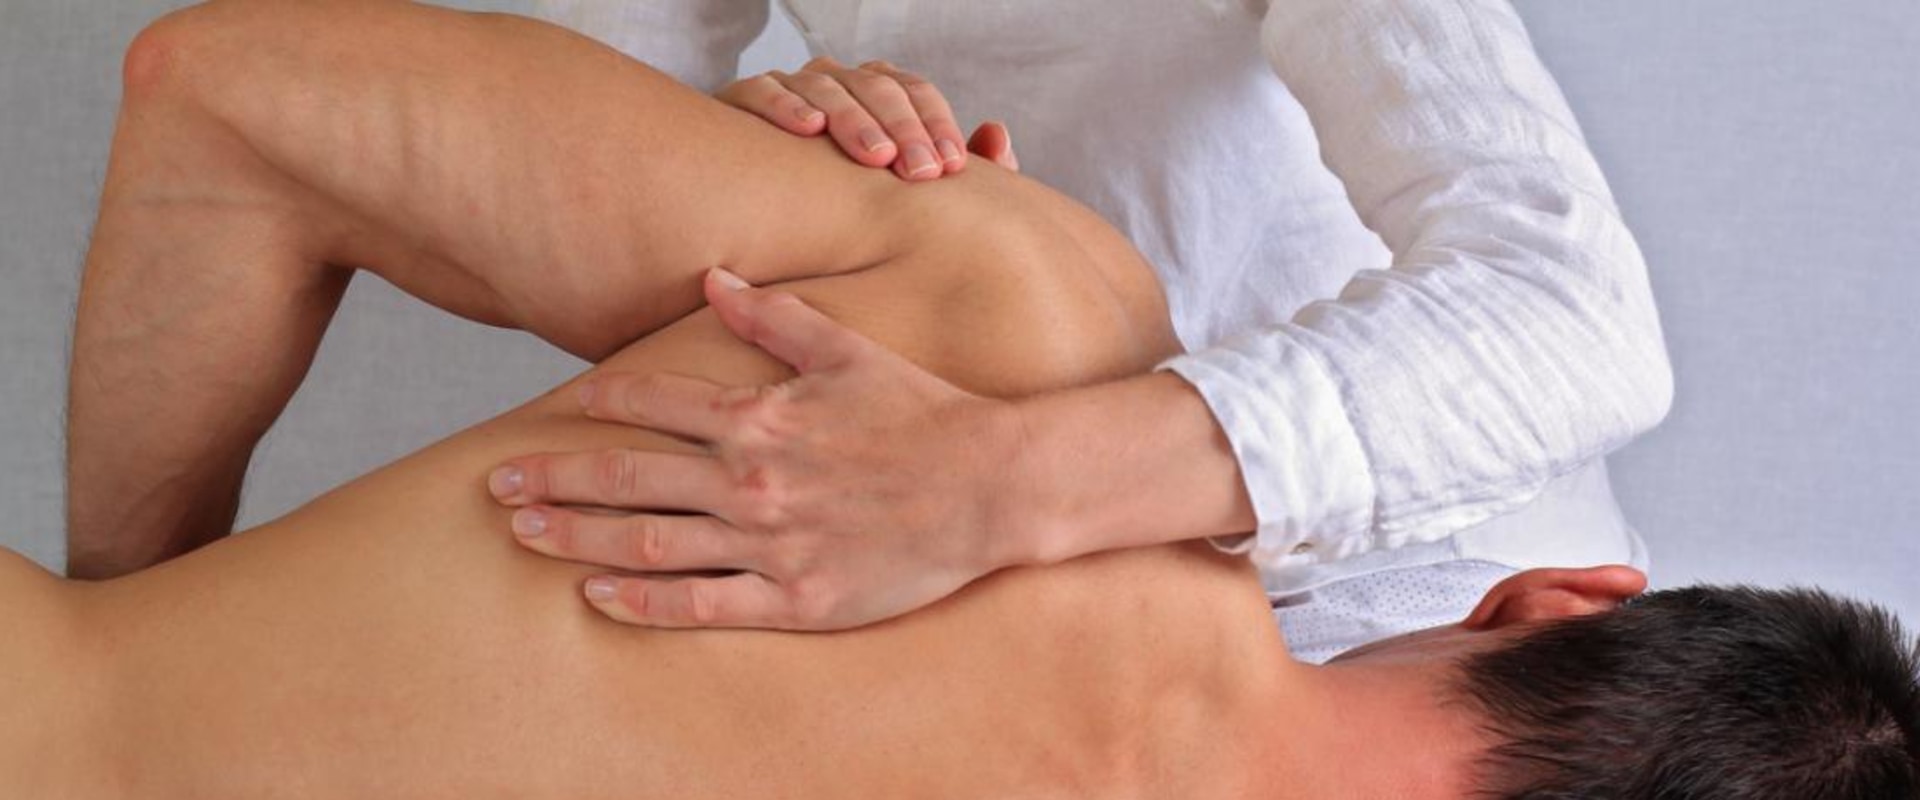 When is osteopathy used?